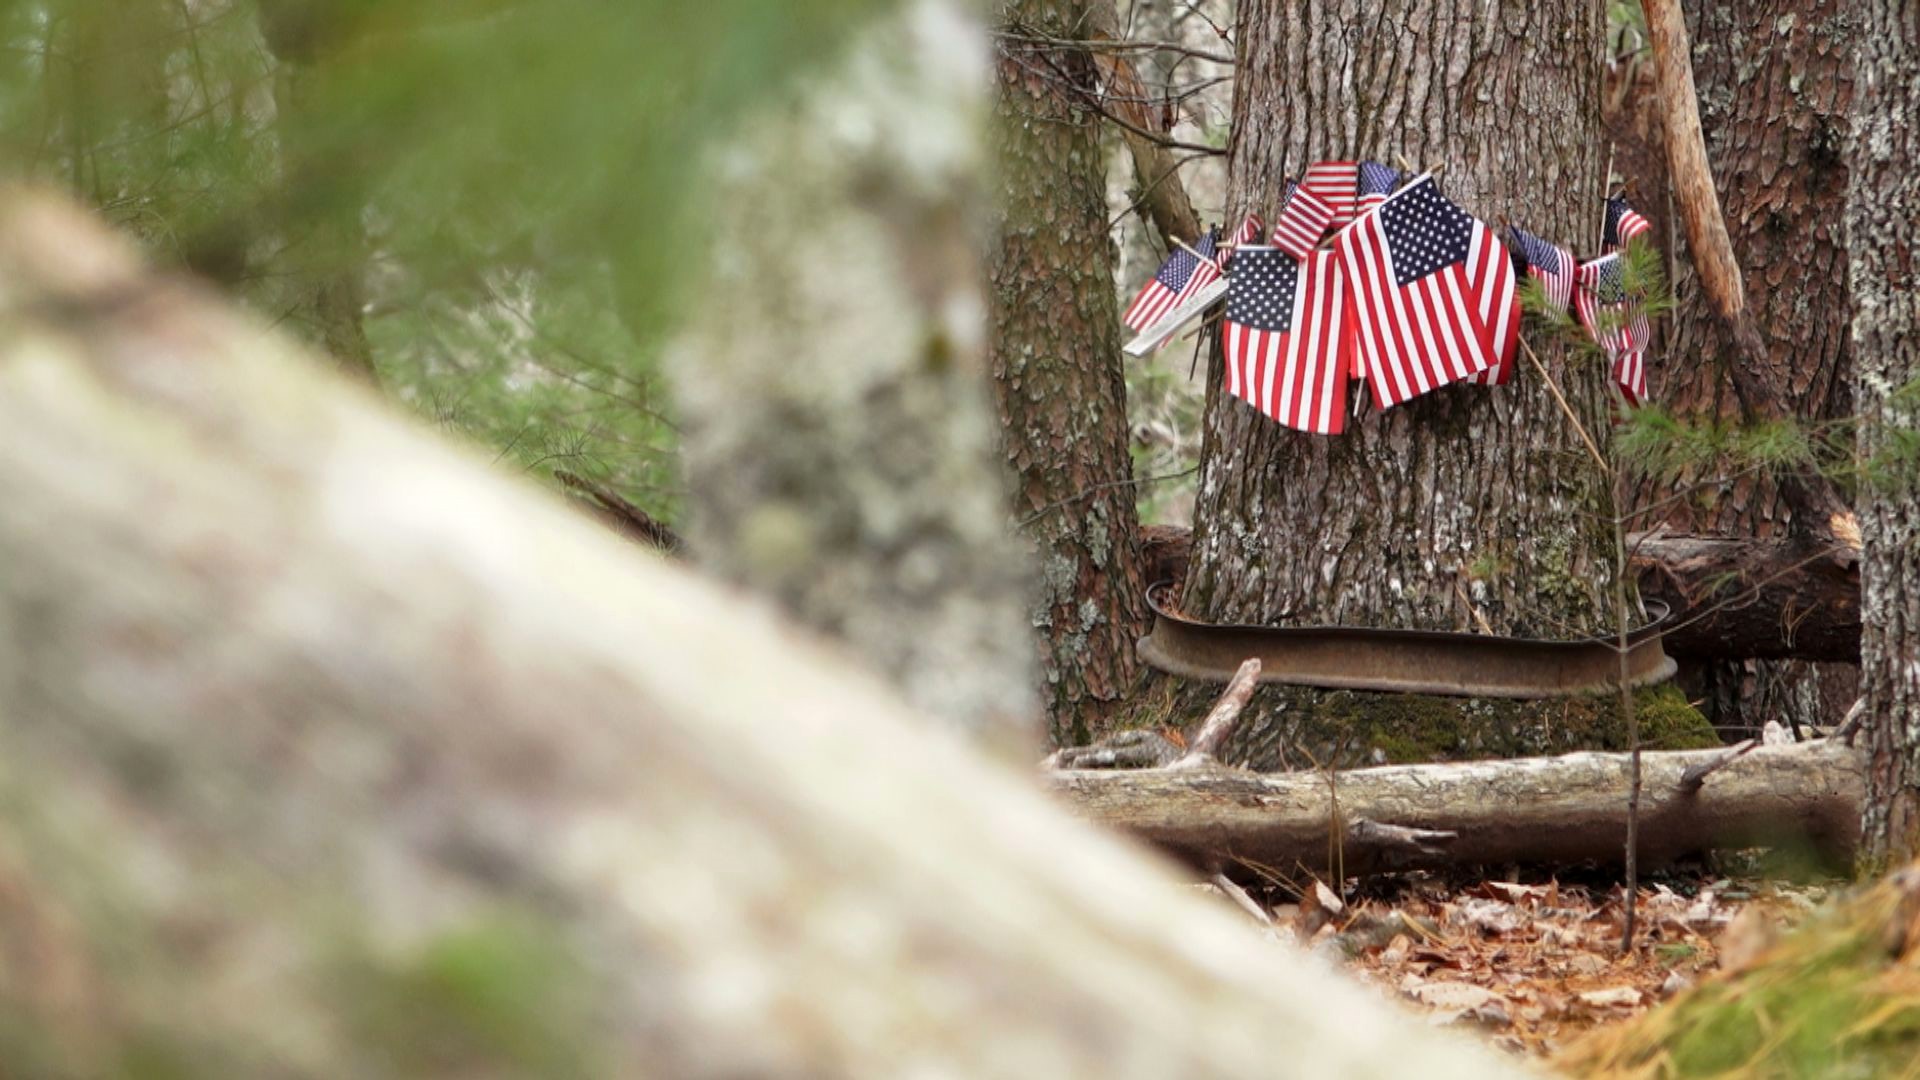 A secluded tree in Cades Cove marked a mournful moment at the Myers family farm with the attack on Pearl Harbor and an impending war (Originally aired December 7, 2015)